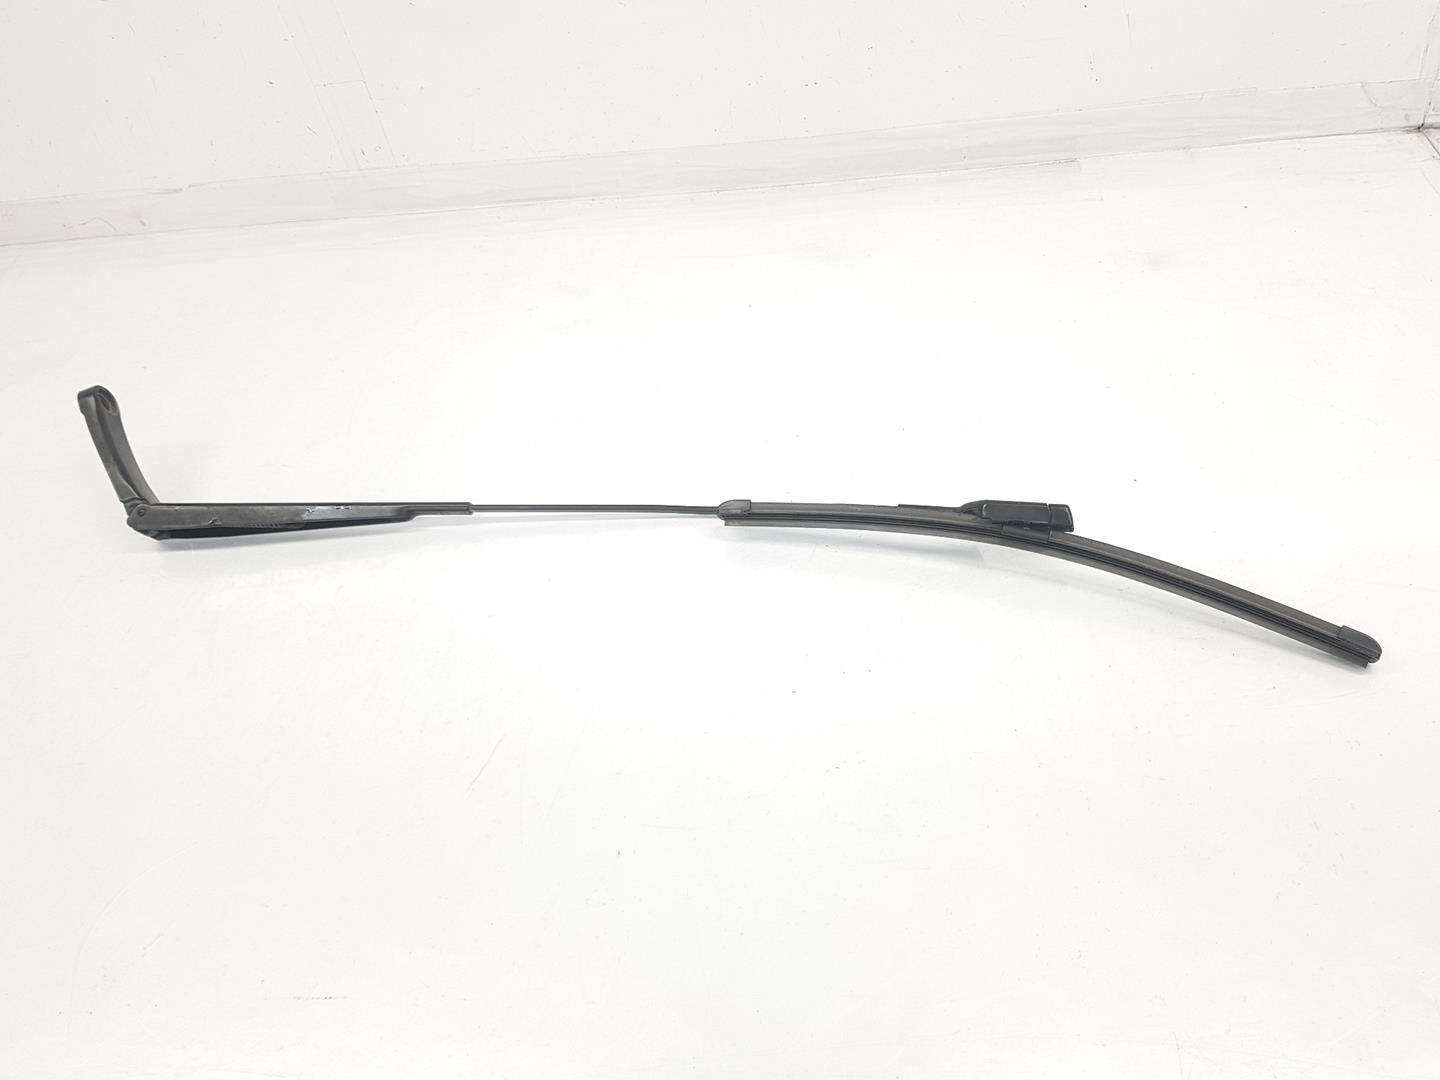 SEAT Leon 3 generation (2012-2020) Front Wiper Arms 5F1955410, 5F1955410 21070046